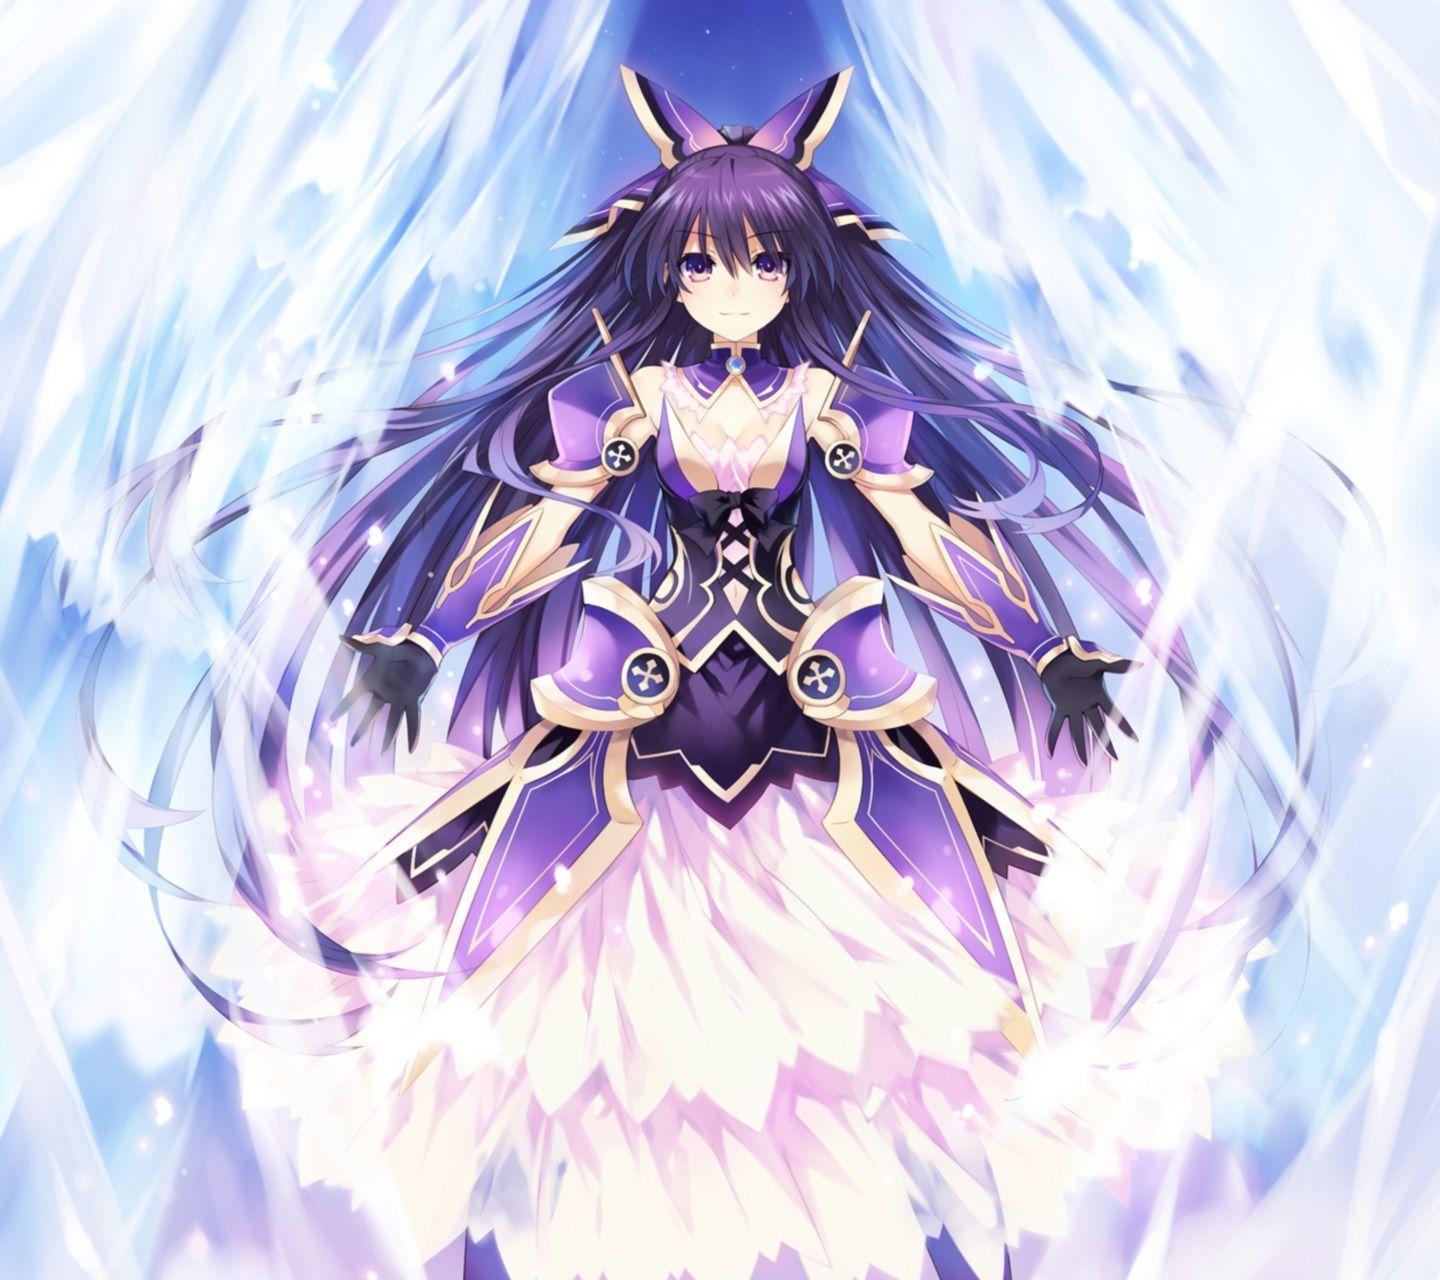 Date A Live.Tohka Yatogami Android Wallpaper.1440x1280 1440